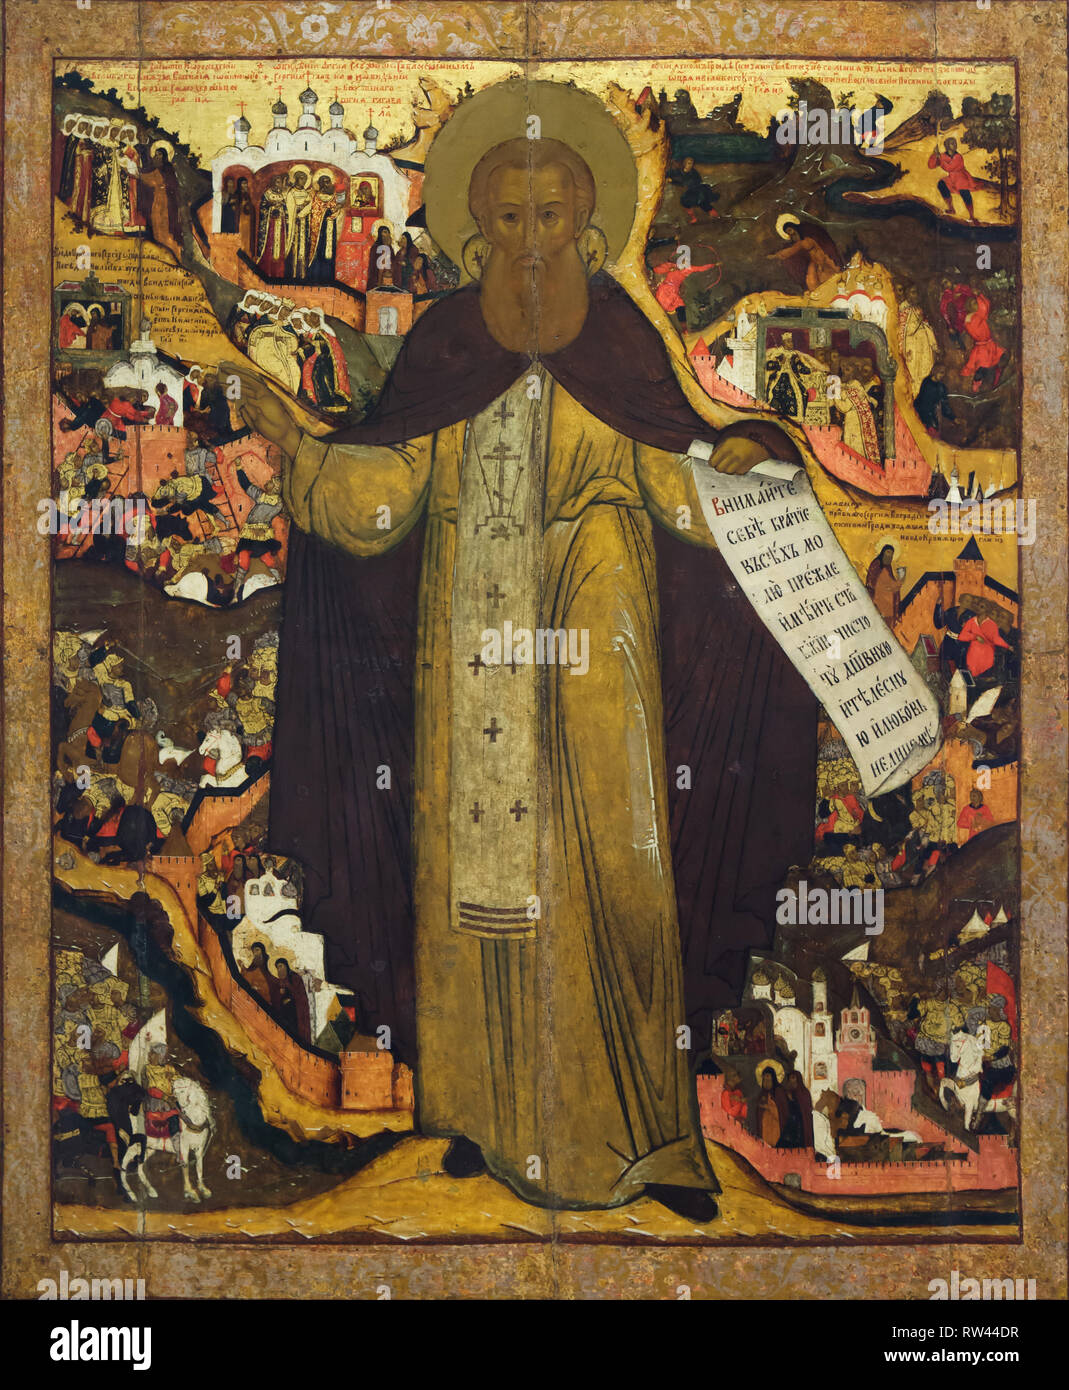 Saint Sergius of Radonezh with scenes from his life. Russian icon of the Yaroslavl icon painting school dated from the beginning of the 17th century on display in the Yaroslavl Art Museum in Yaroslavl, Russia. Stock Photo